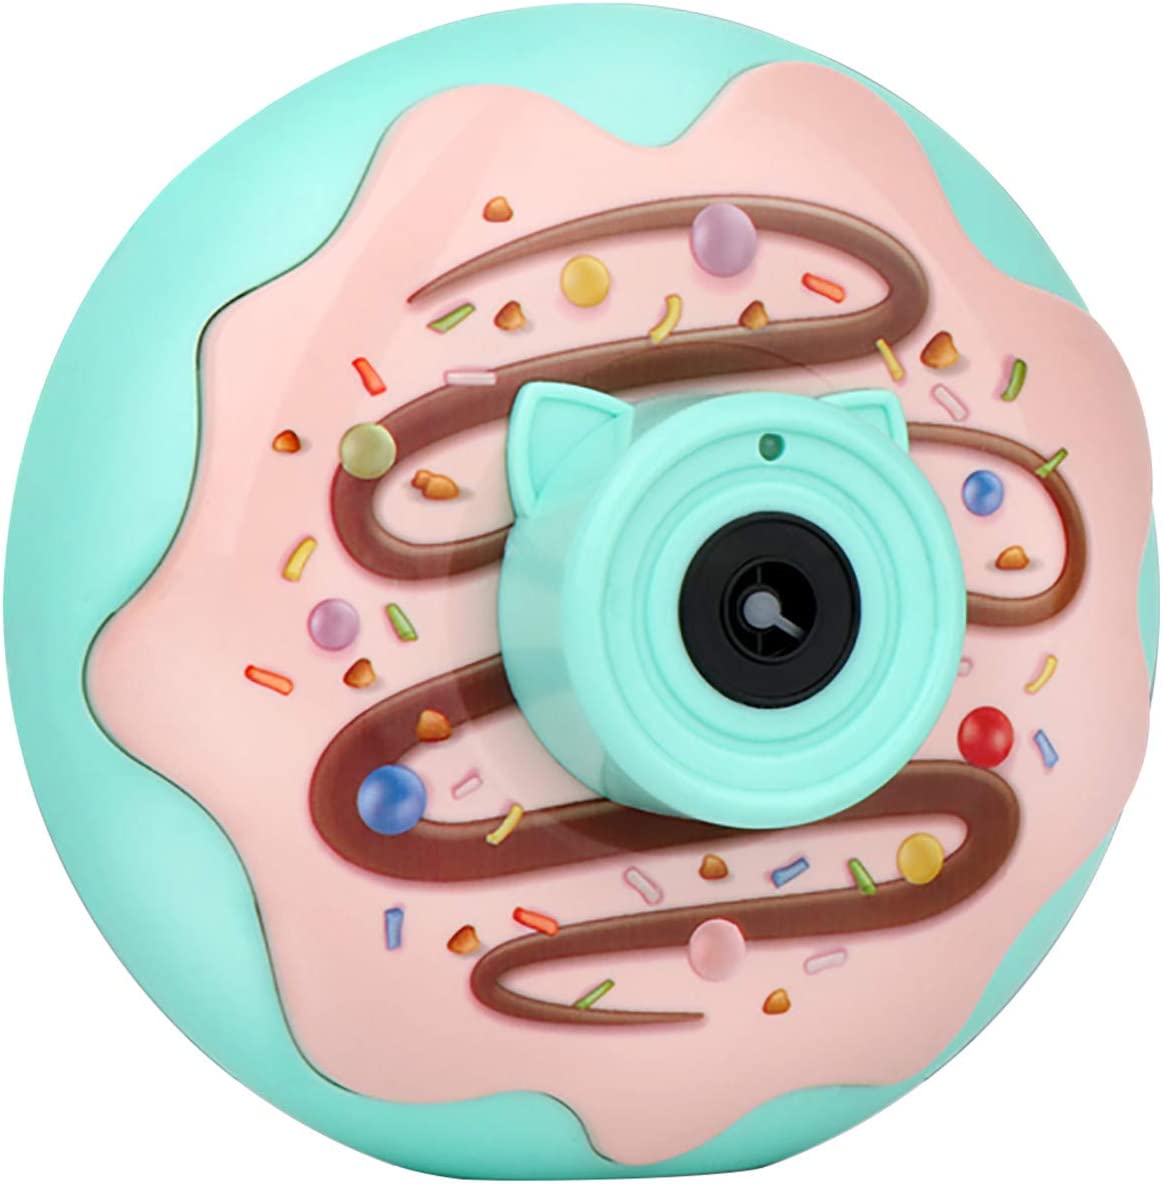 Light and Music Donut Automatic Bubble Camera For Kds